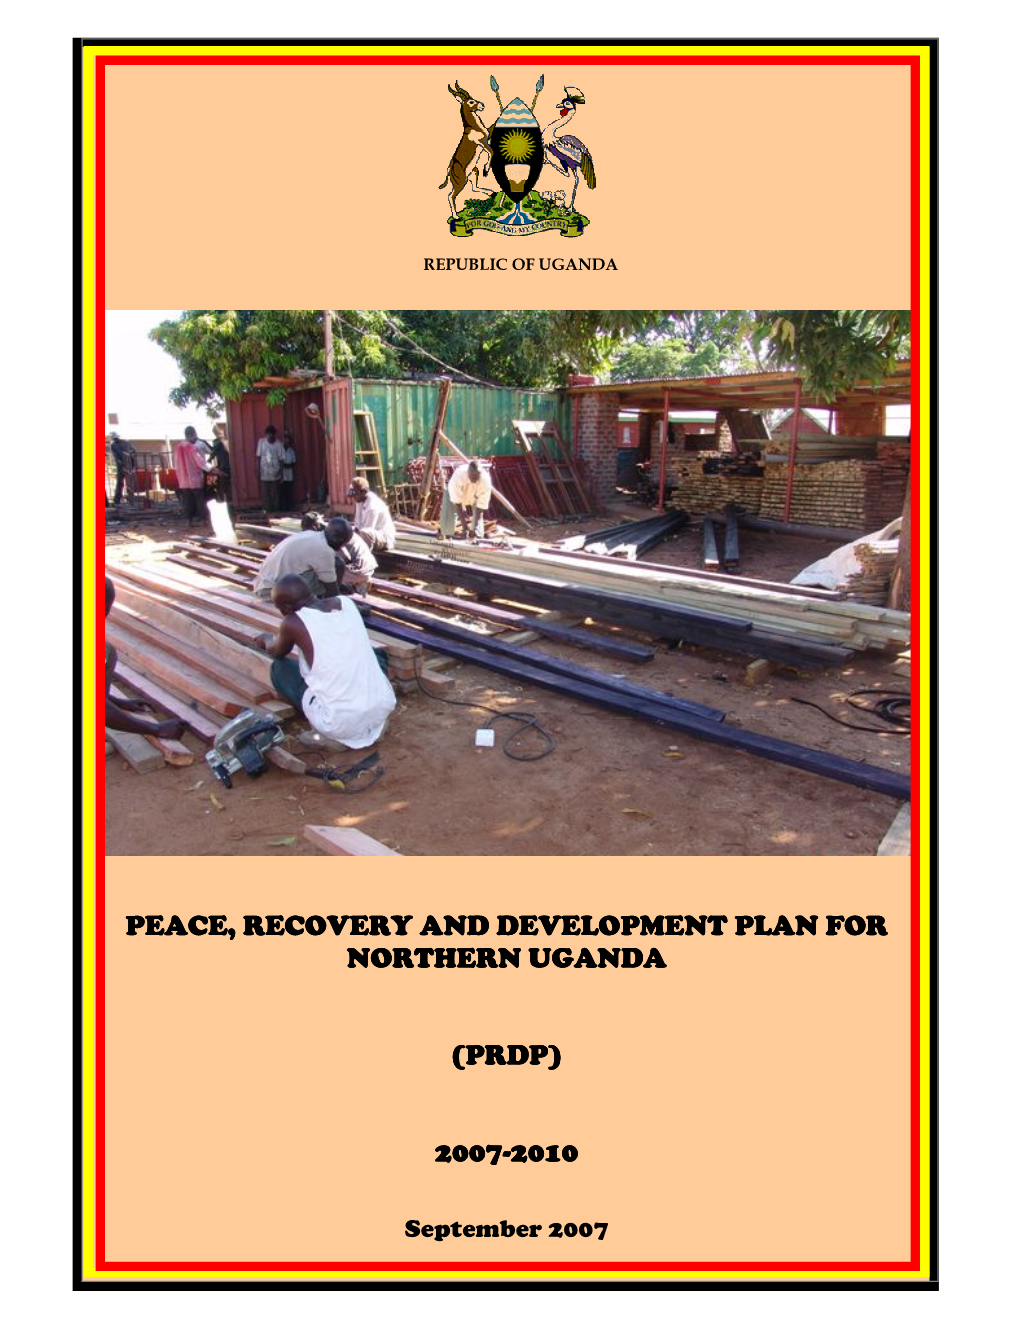 Peace, Recovery and Development Plan for Northern Uganda (PRDP), As a Strategy to Eradicate Poverty and Improve the Welfare of the Populace in Northern Uganda